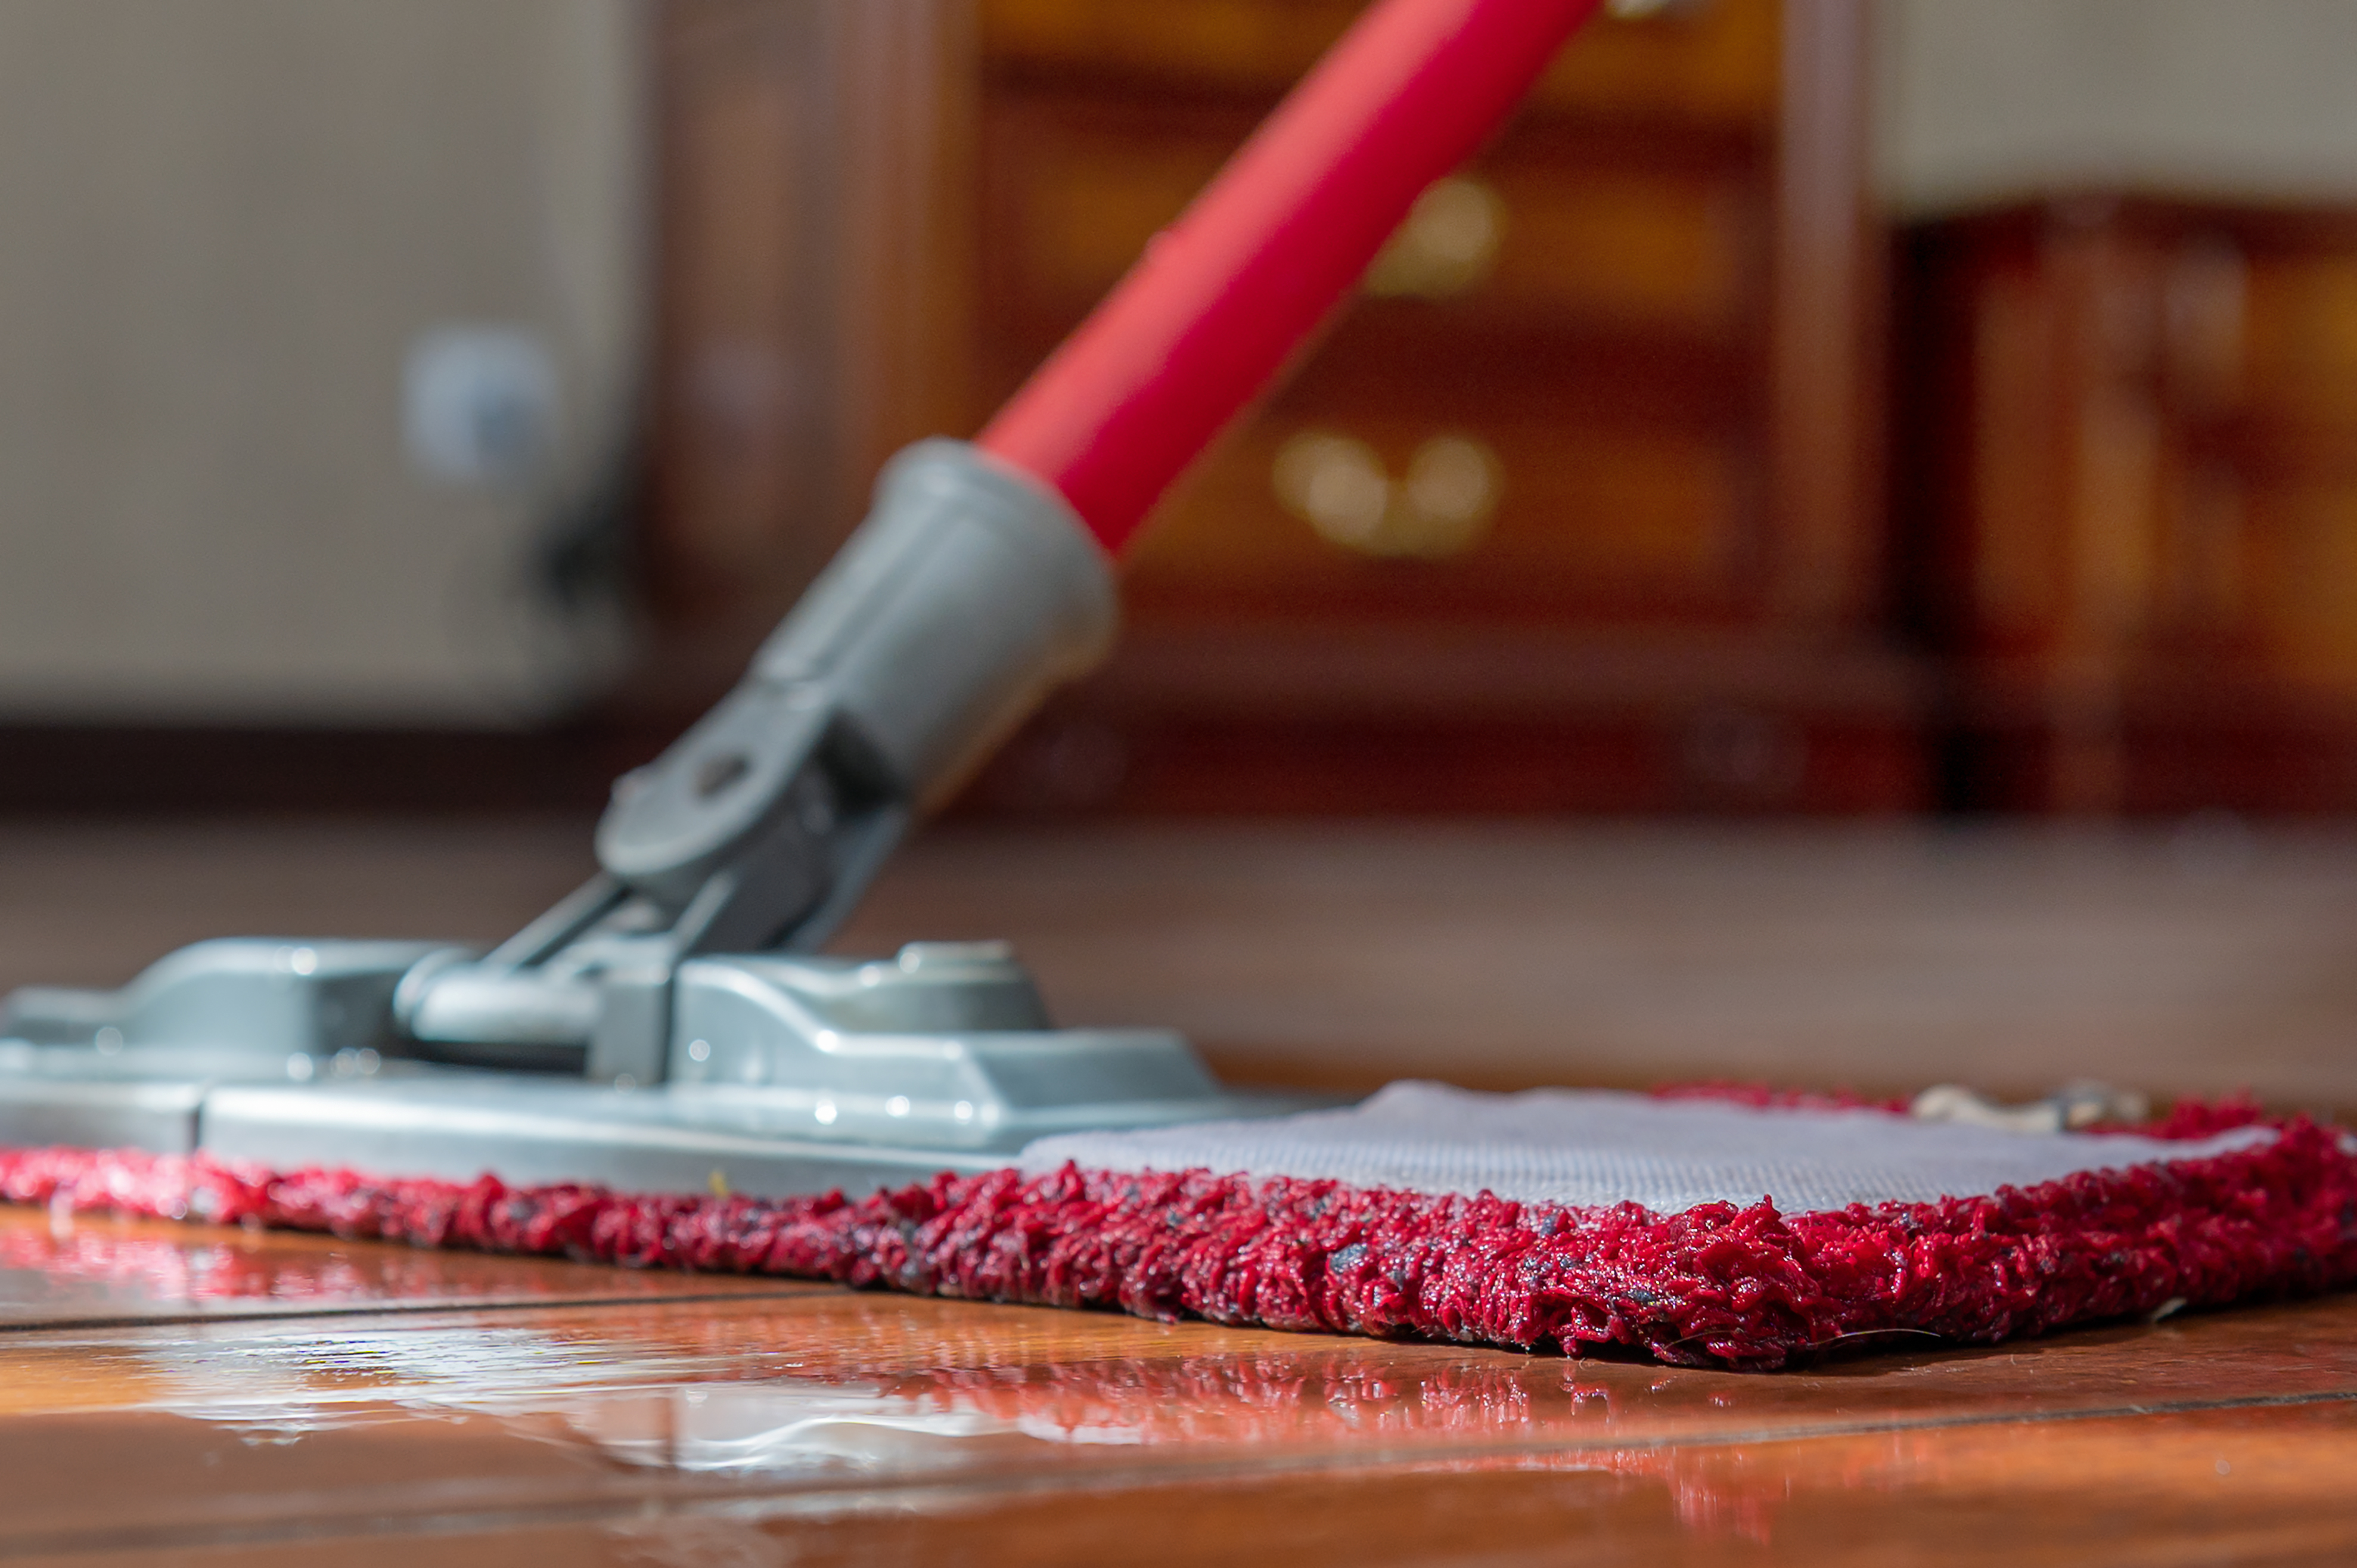 This Time-Saving Spray Mop Removes Dirt and Sticky Messes From All Floors